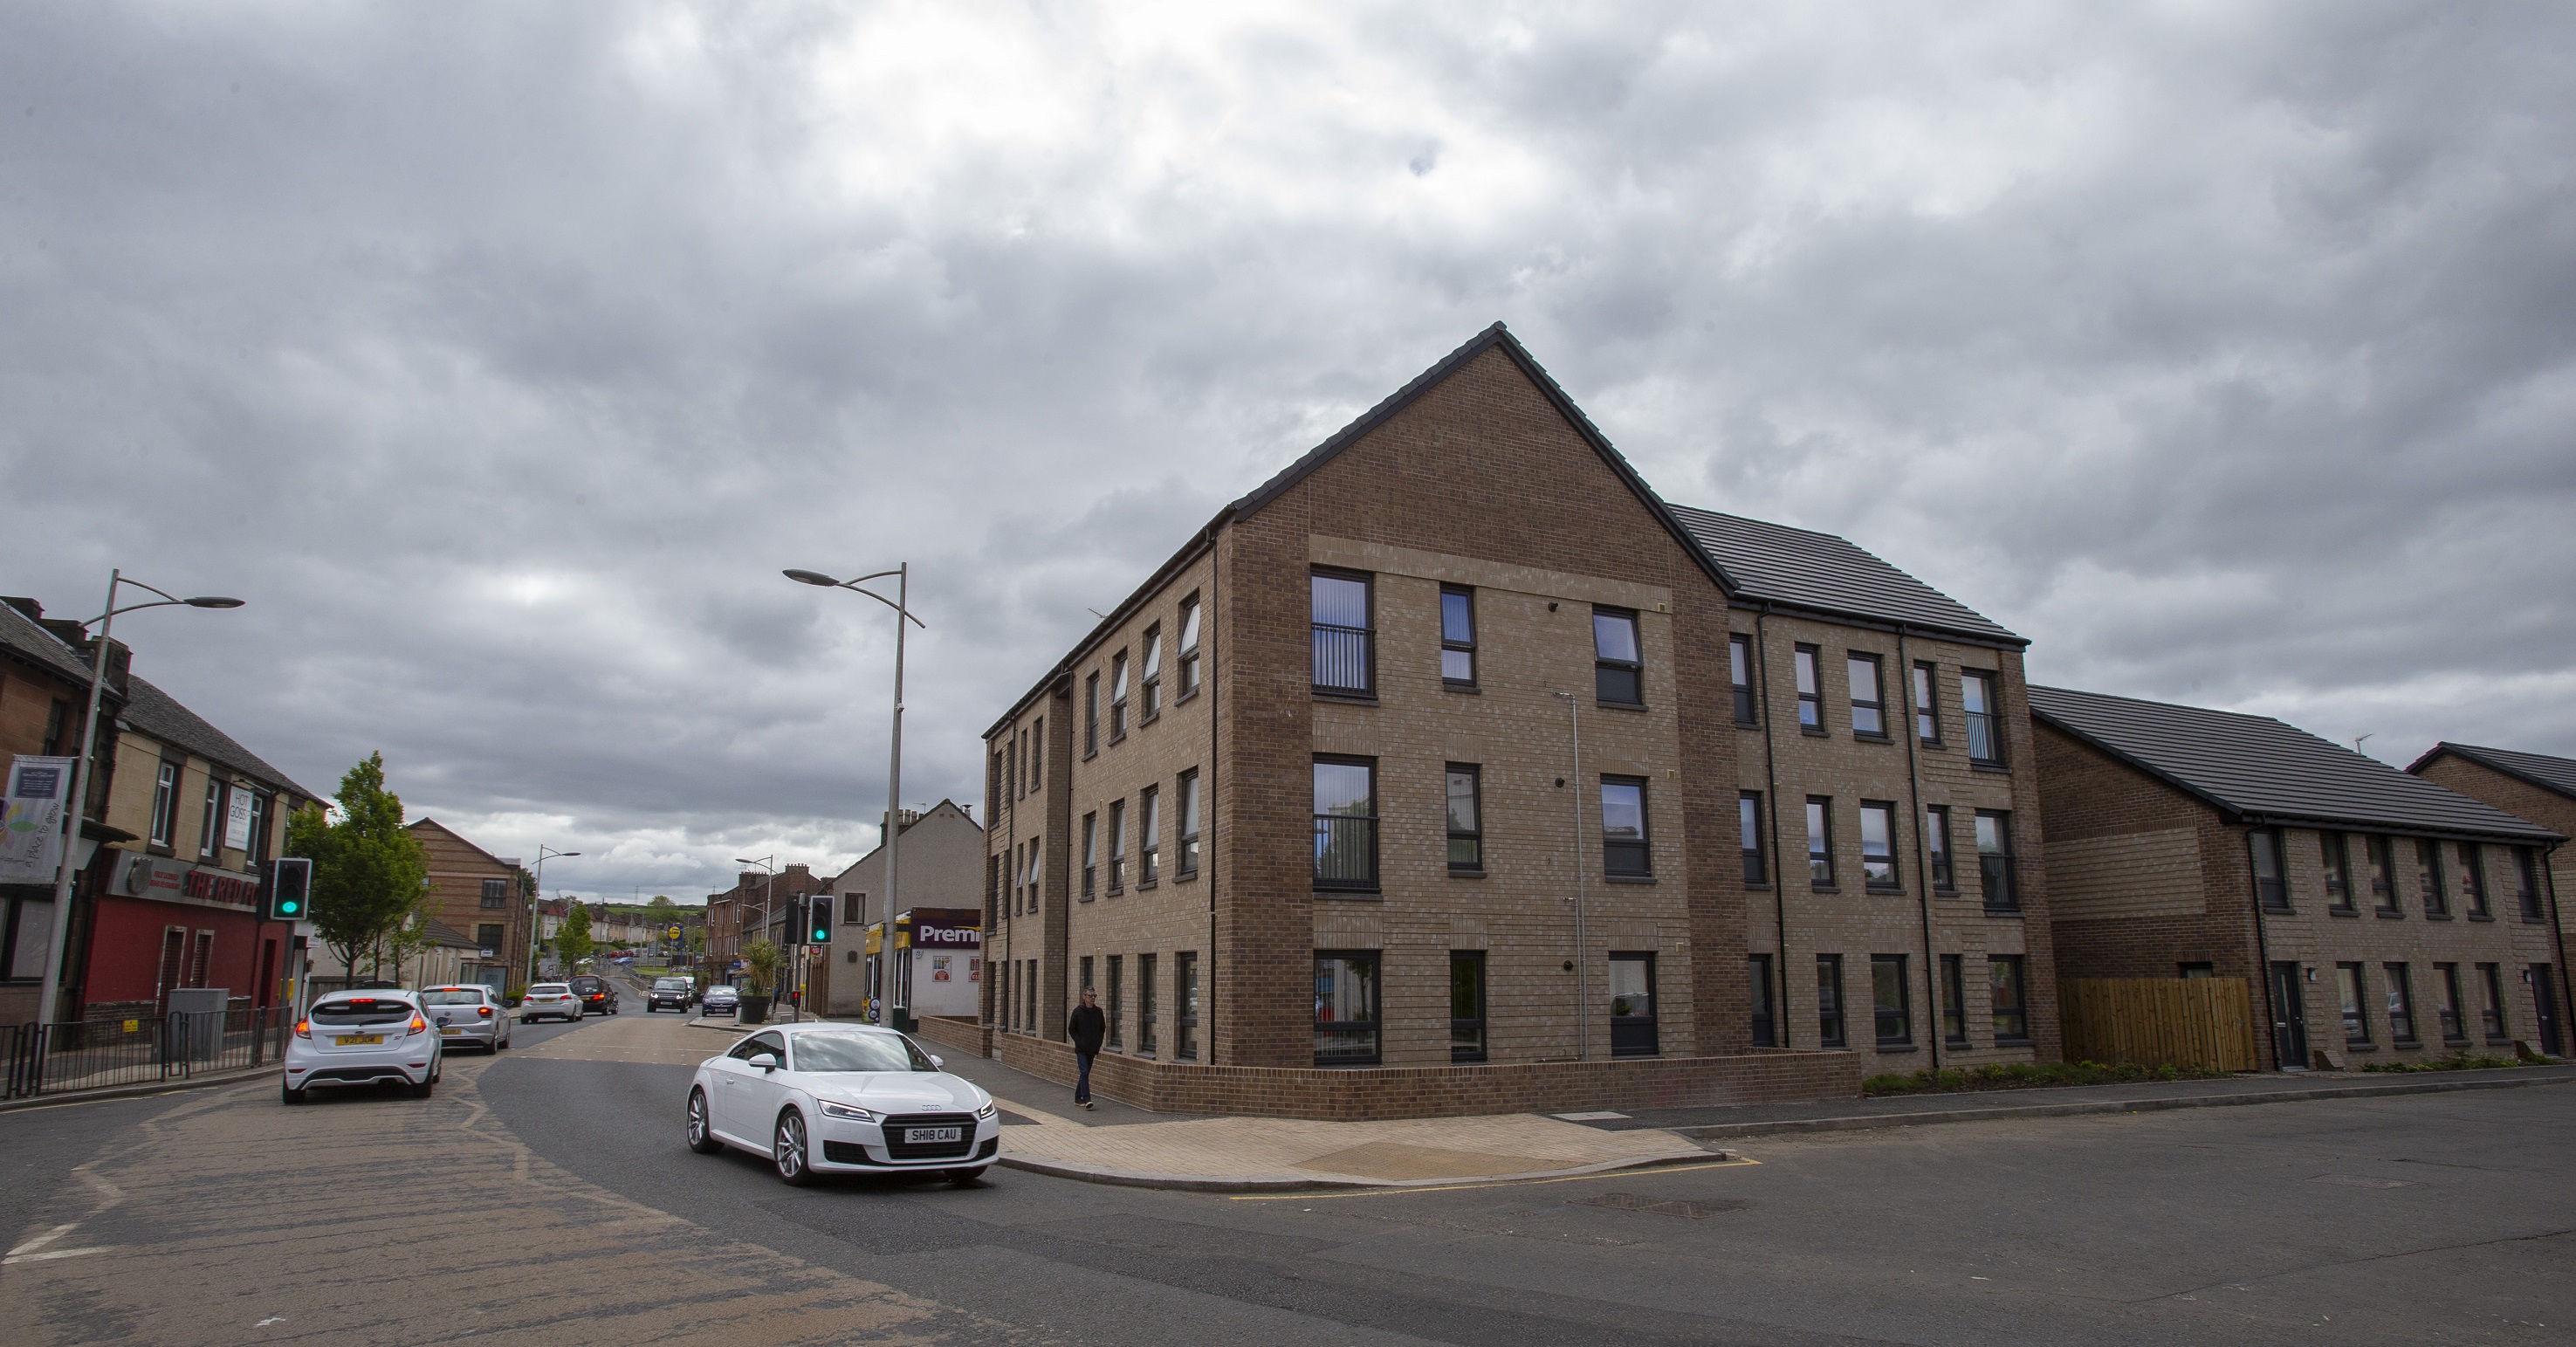 New East Renfrewshire council homes handed over to tenants